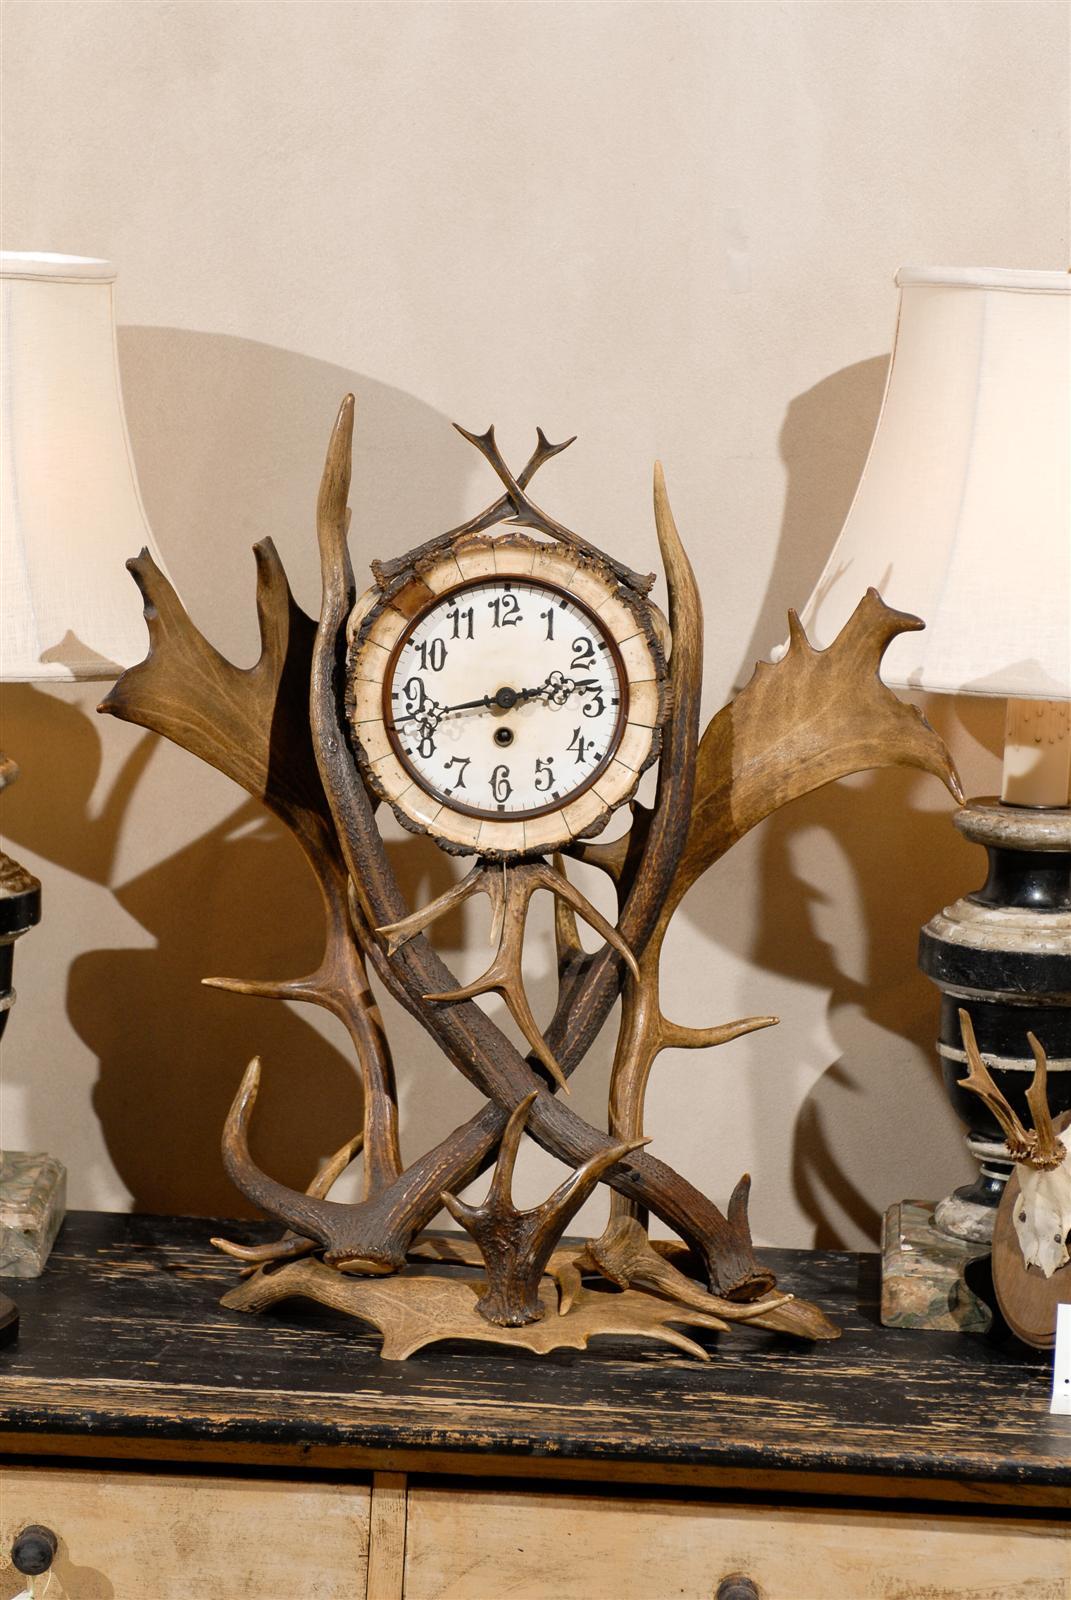 19th Century German Antler Clock, Circa 1875
This very interesting collection of antlers makes a wonderful surround for a simple round clock.  This clock has great height and looks great on a tabletop or mantel. 